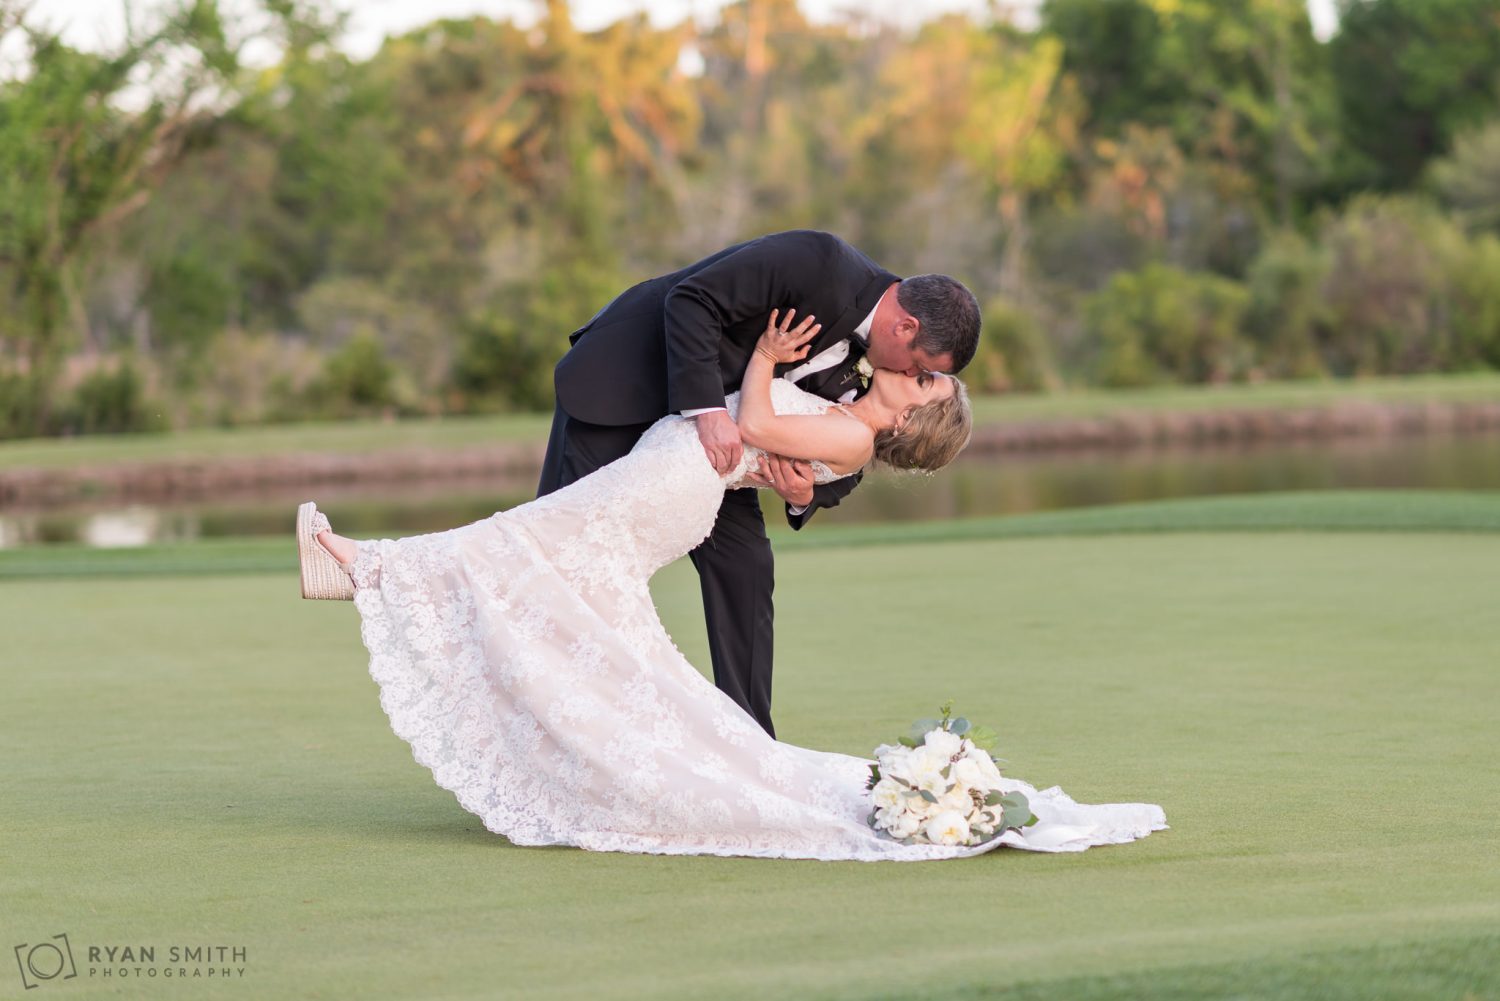 Groom doing a great dip of the bride on the green  Pawleys Plantation